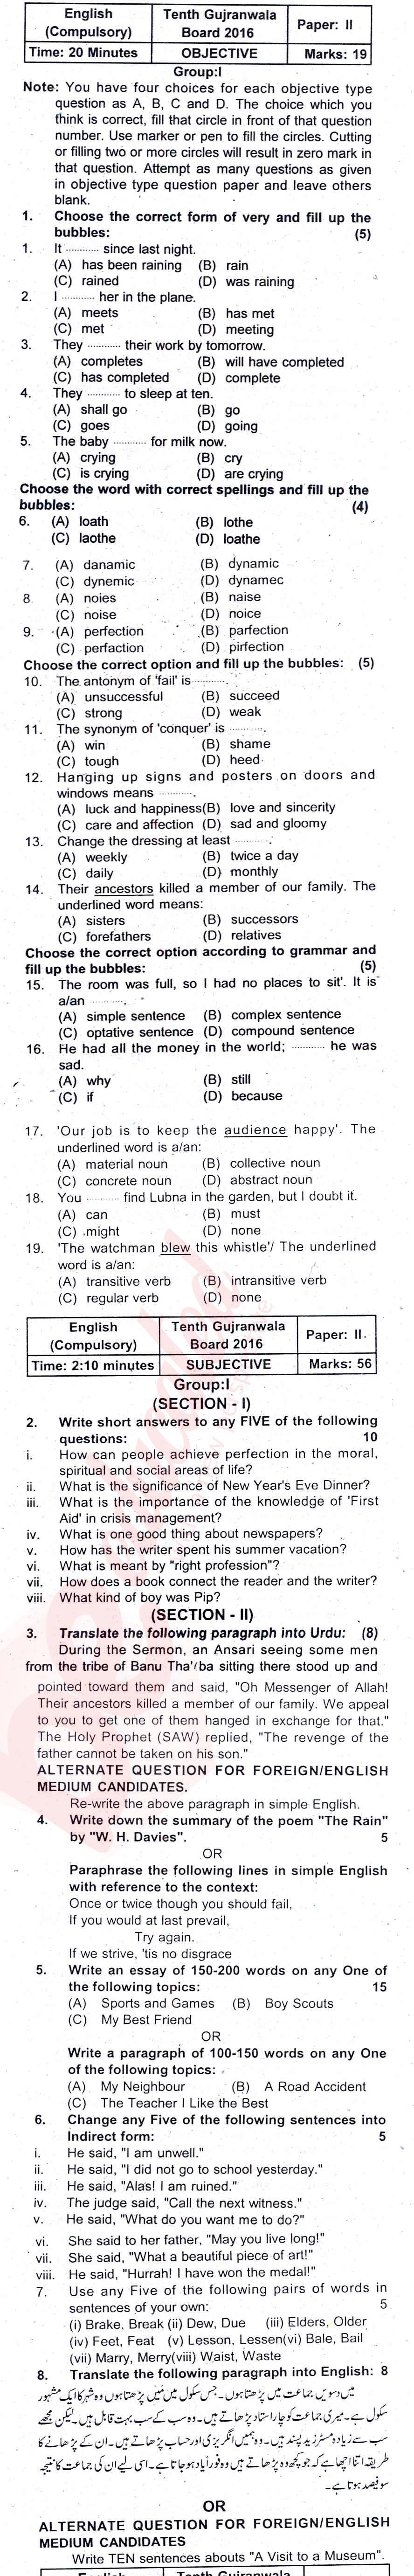 English 10th class Past Paper Group 1 BISE Gujranwala 2016